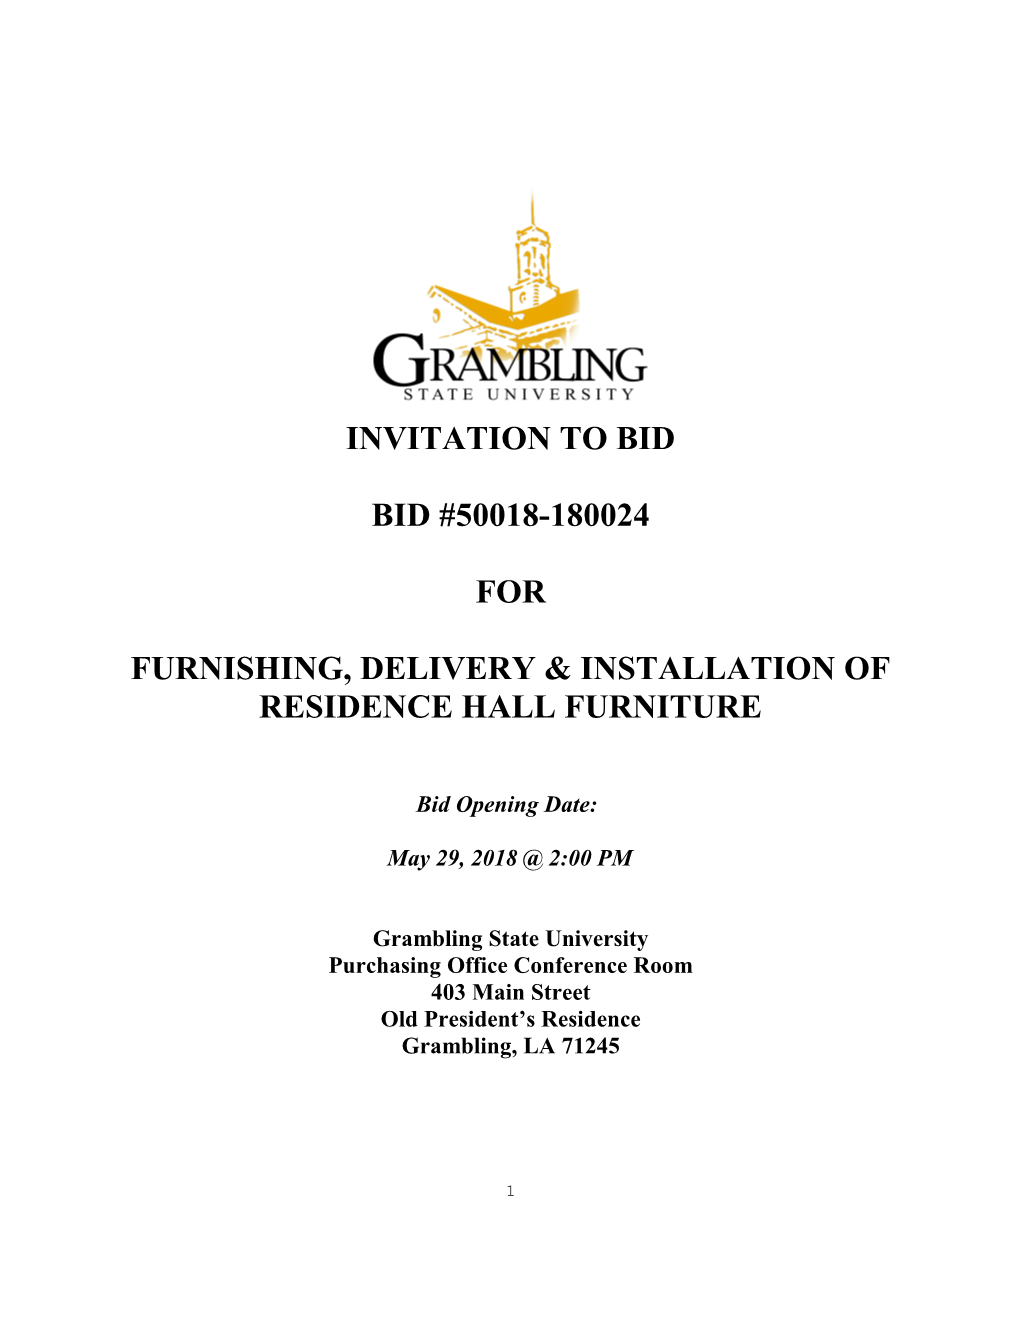 Furnishing, Delivery & Installation of Residence Hall Furniture